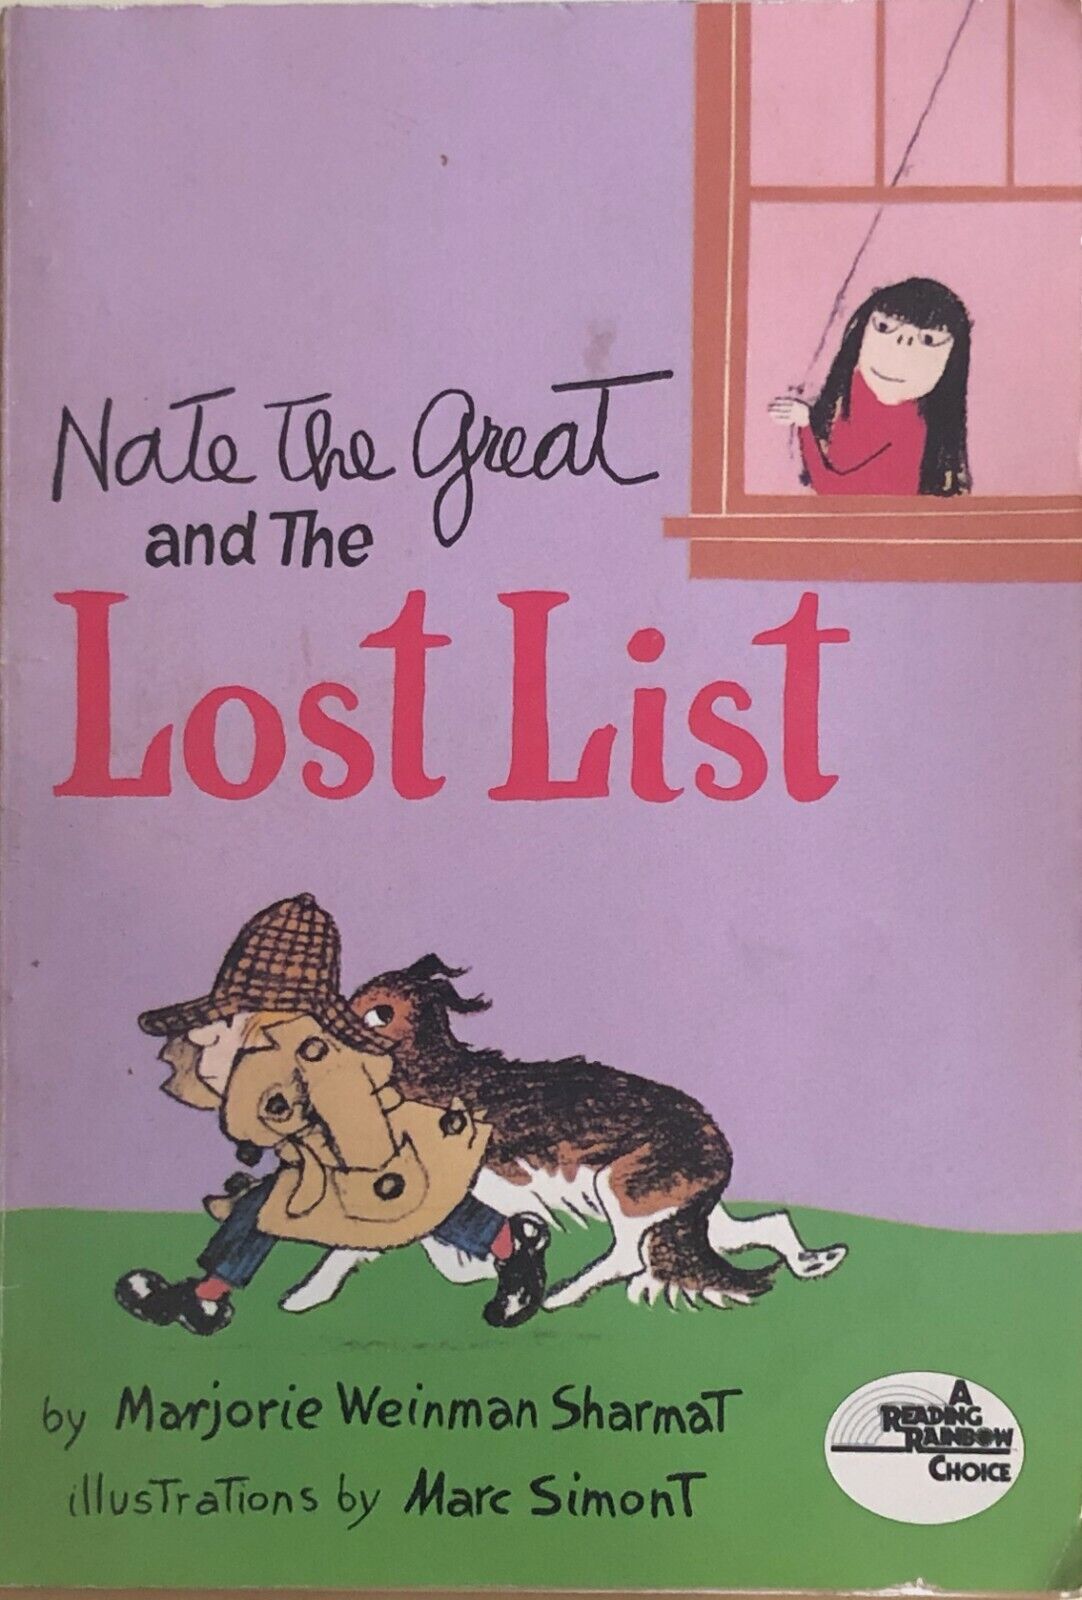 Nate the great and the Lost List di Aa.vv., 1981, A Reading Rainbow Choice